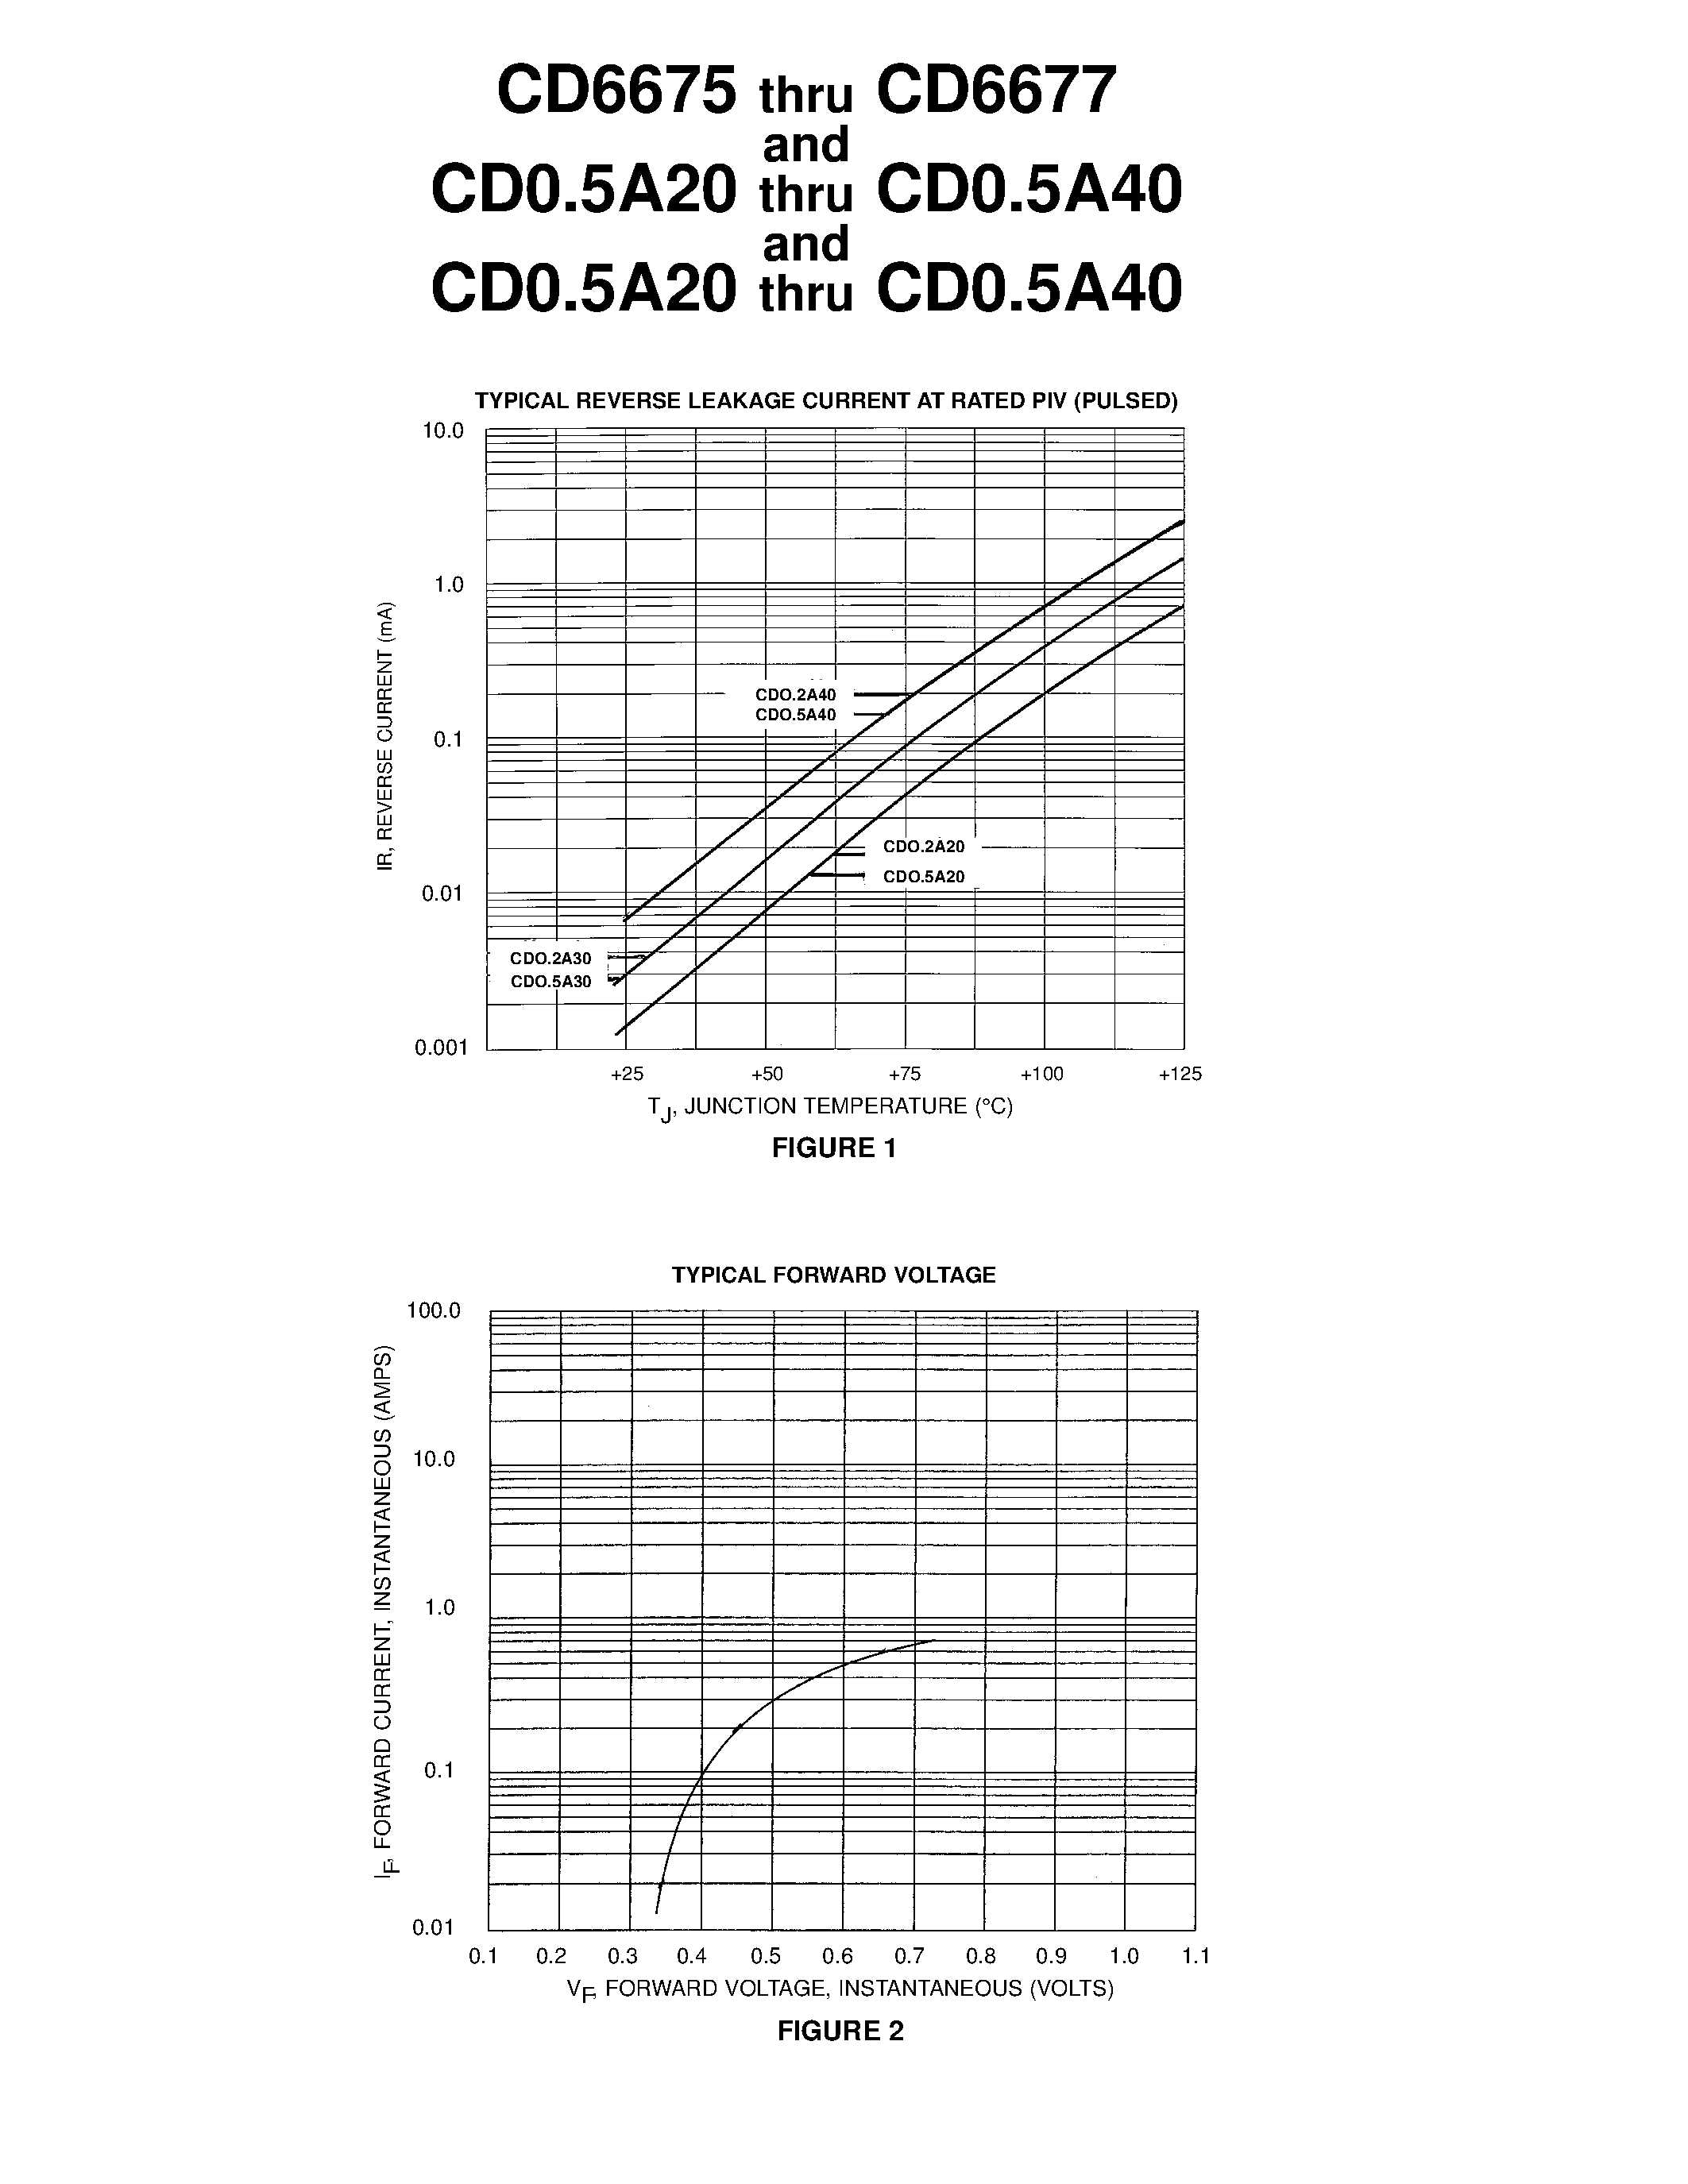 Даташит CD6675-SILICON DIOXIDE PASSIVATED страница 2